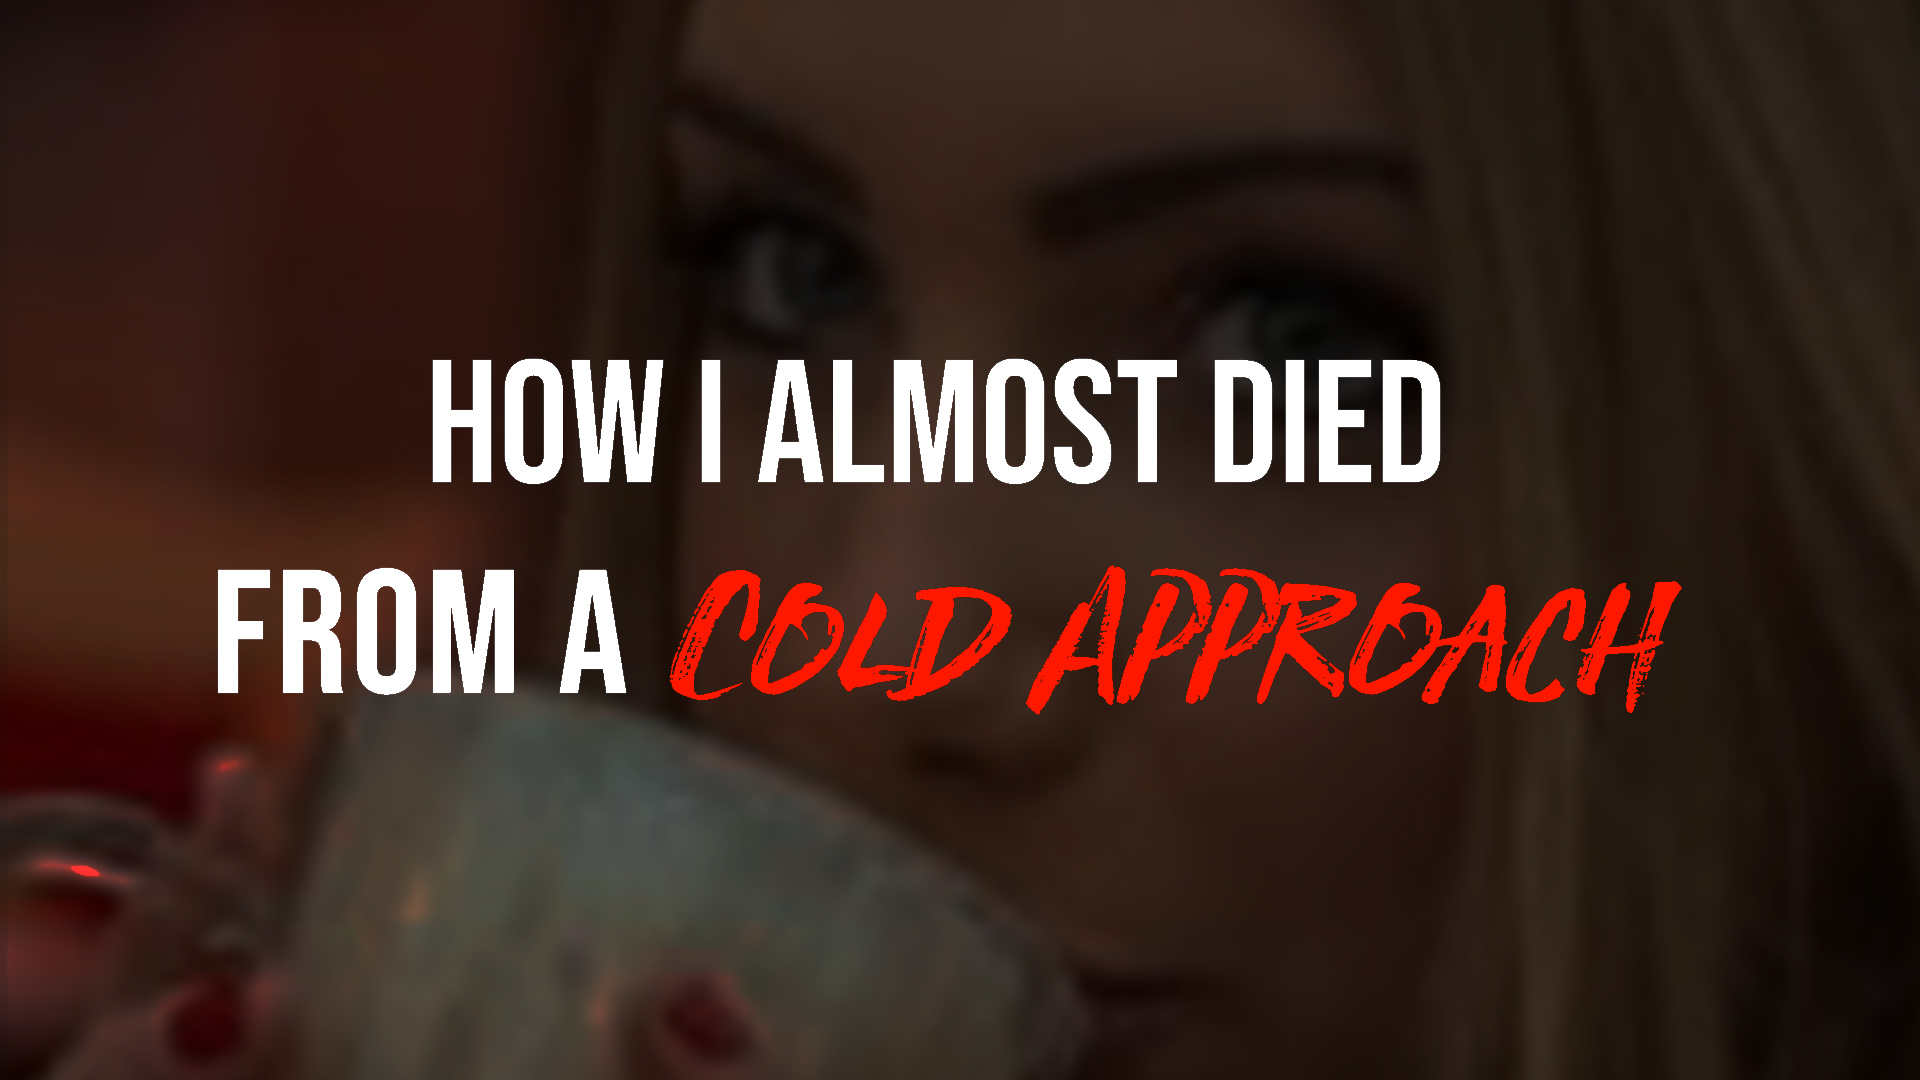 10 Years Ago I Almost Died From A Cold Approach